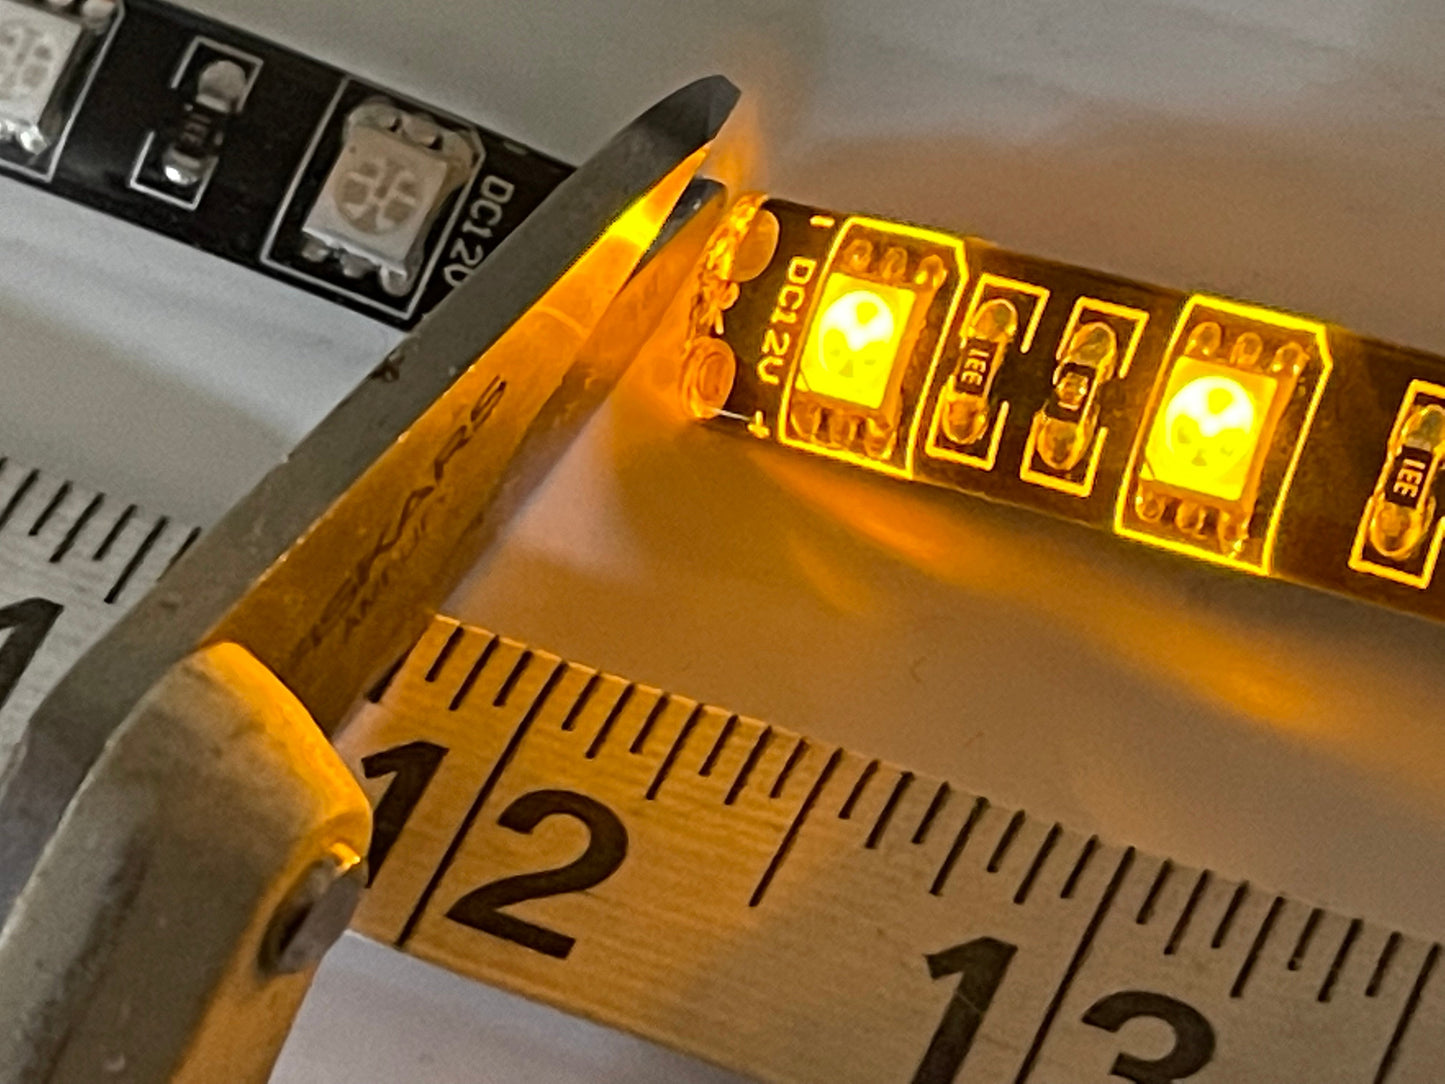 2 LED strips into 1 Battery 9V Connector - Steady On - Cuttable Project Cosplay Lights